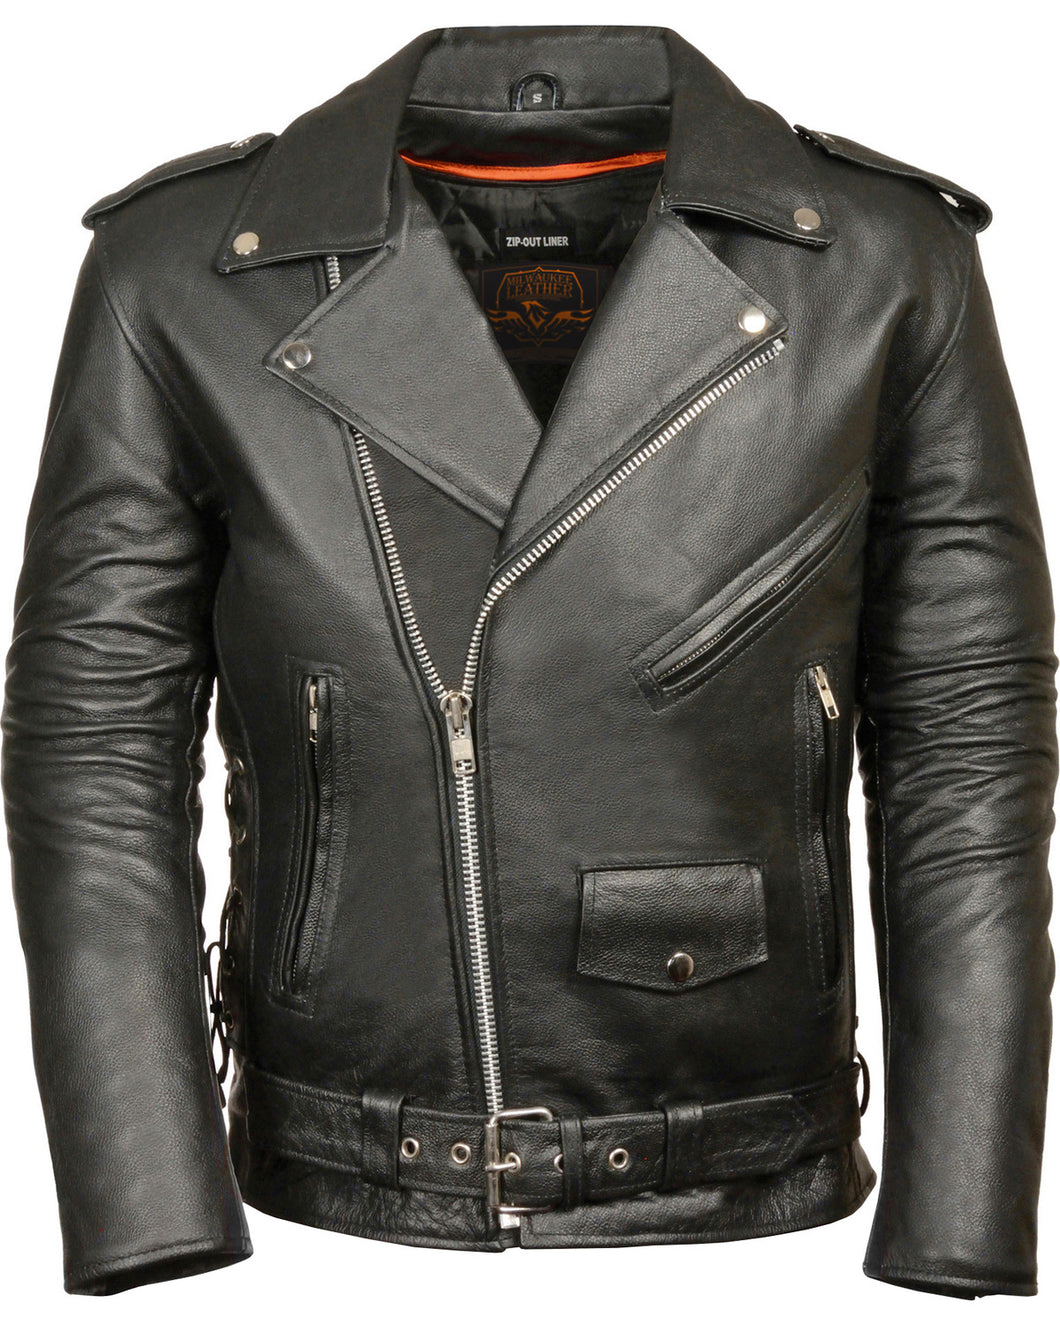 Men's Classic Side Lace Police Style Motorcycle Jacket